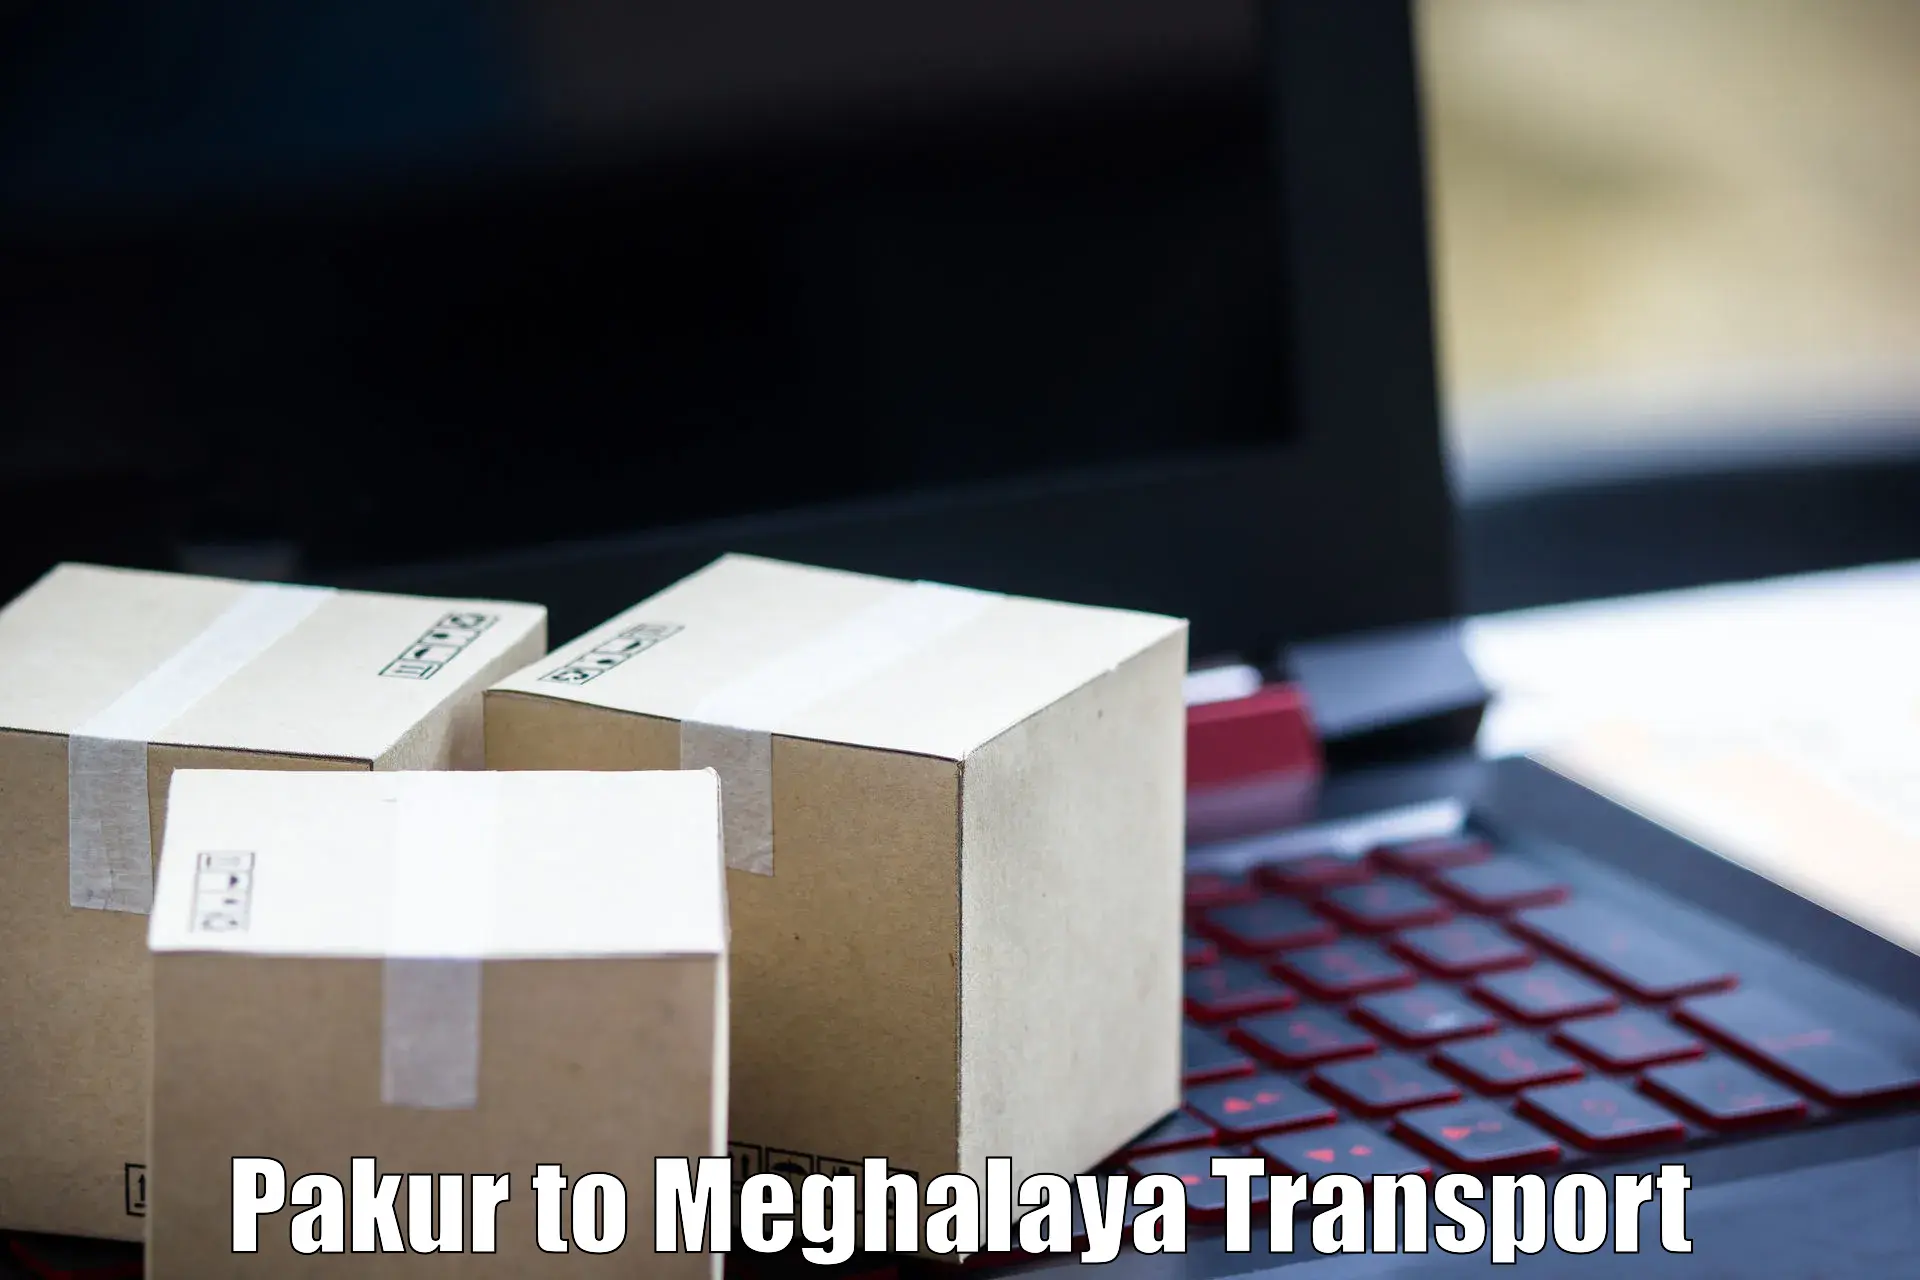 Delivery service Pakur to Meghalaya